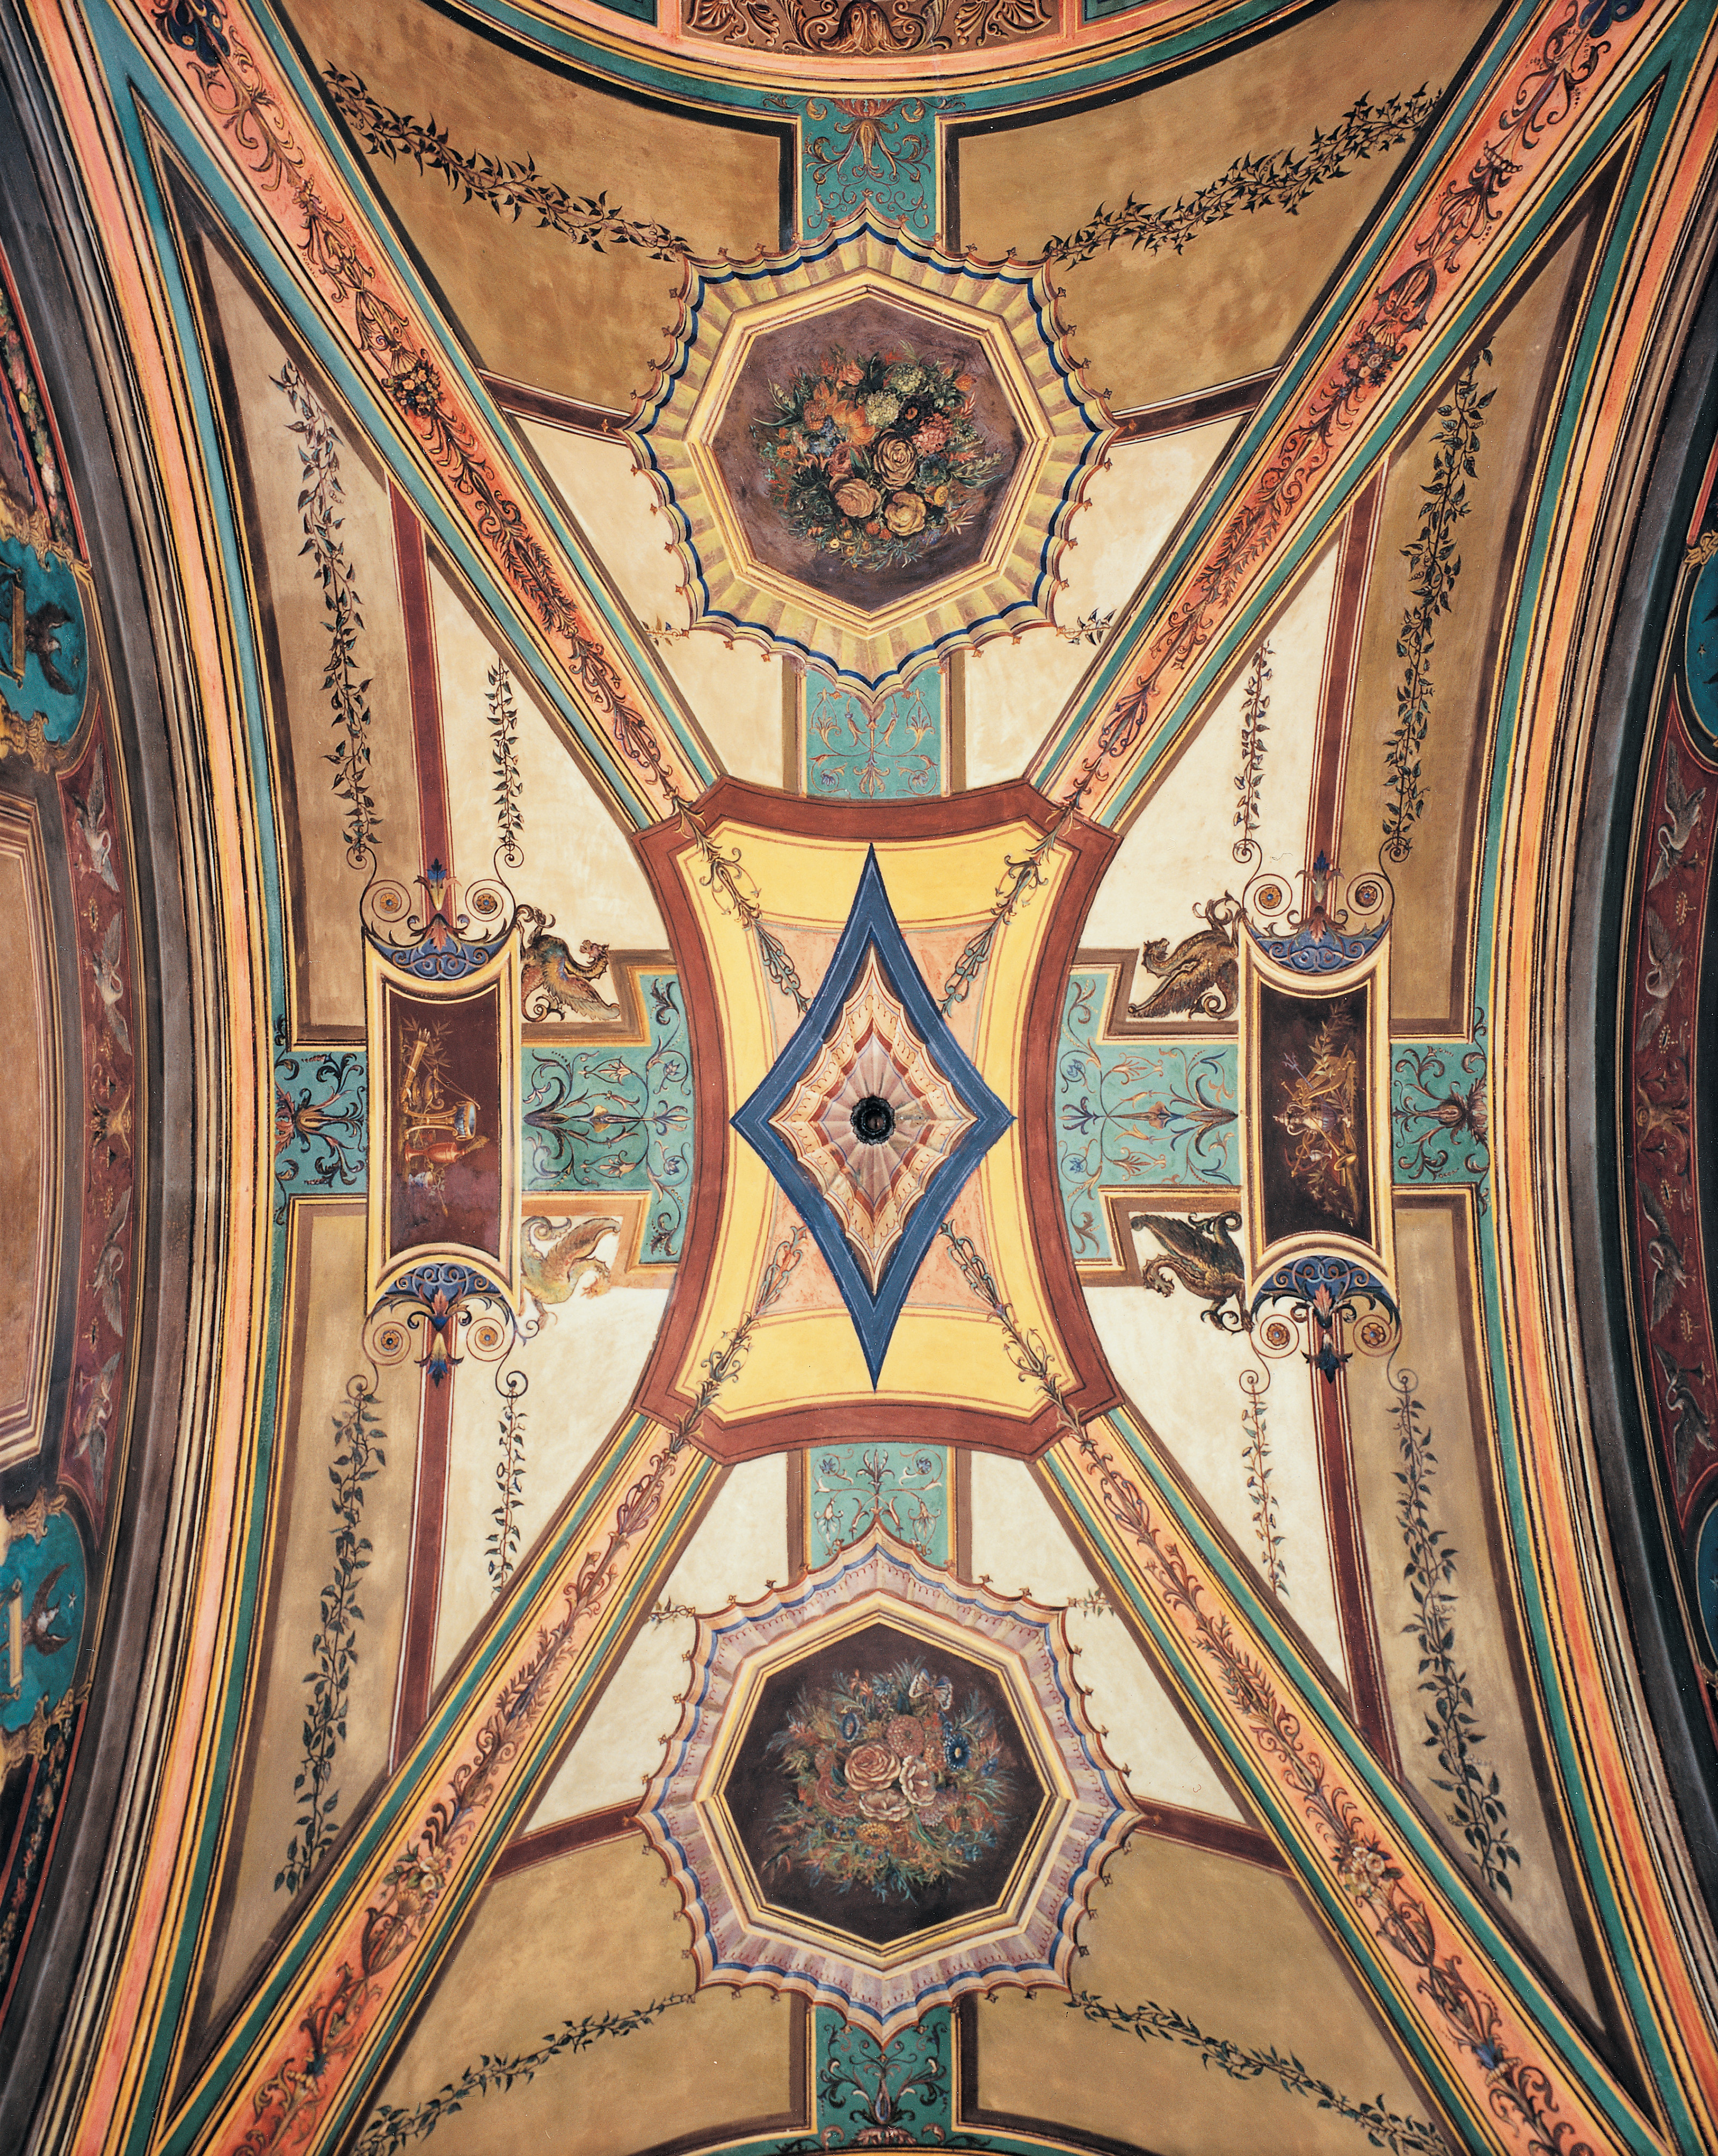 Ceiling of the North Entry area in the Brumidi Corridors.